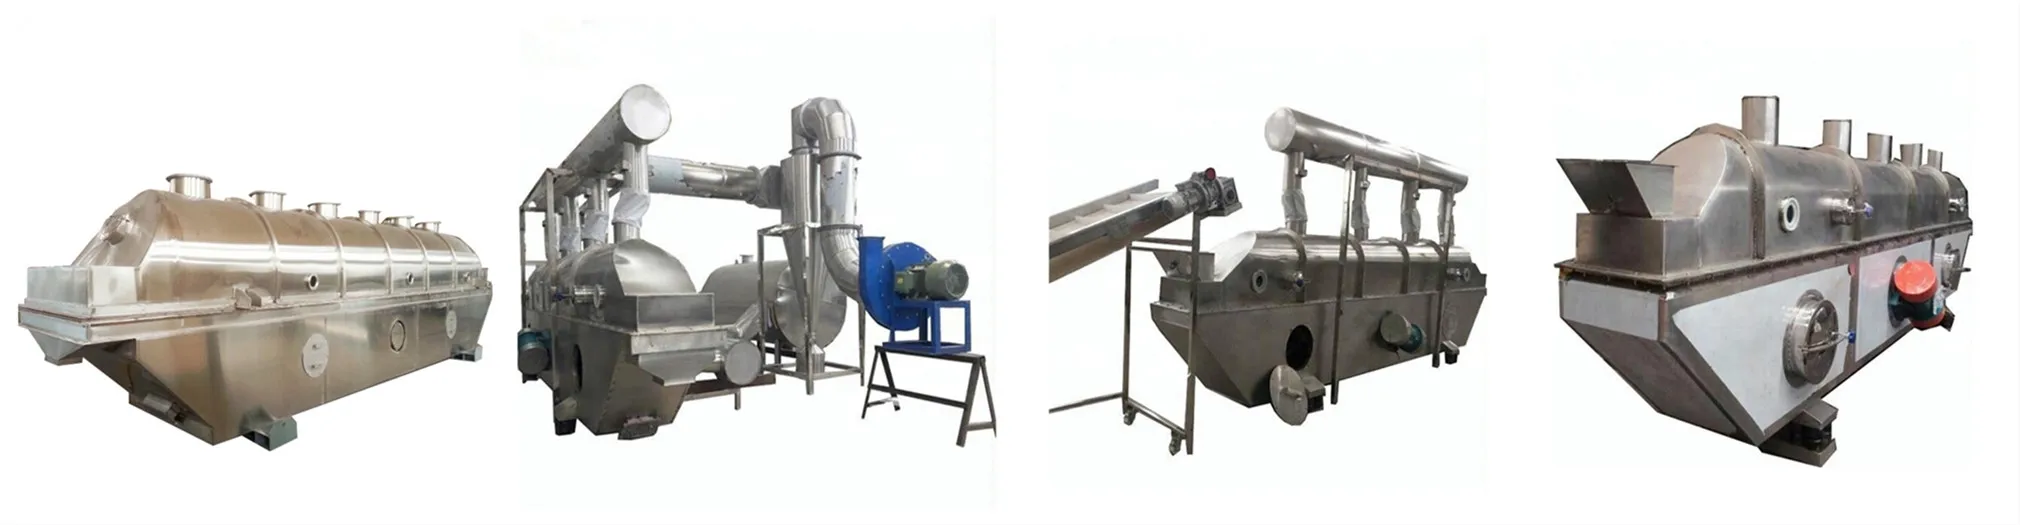 Hot selling soup powder vibrating fluidized bed dryer